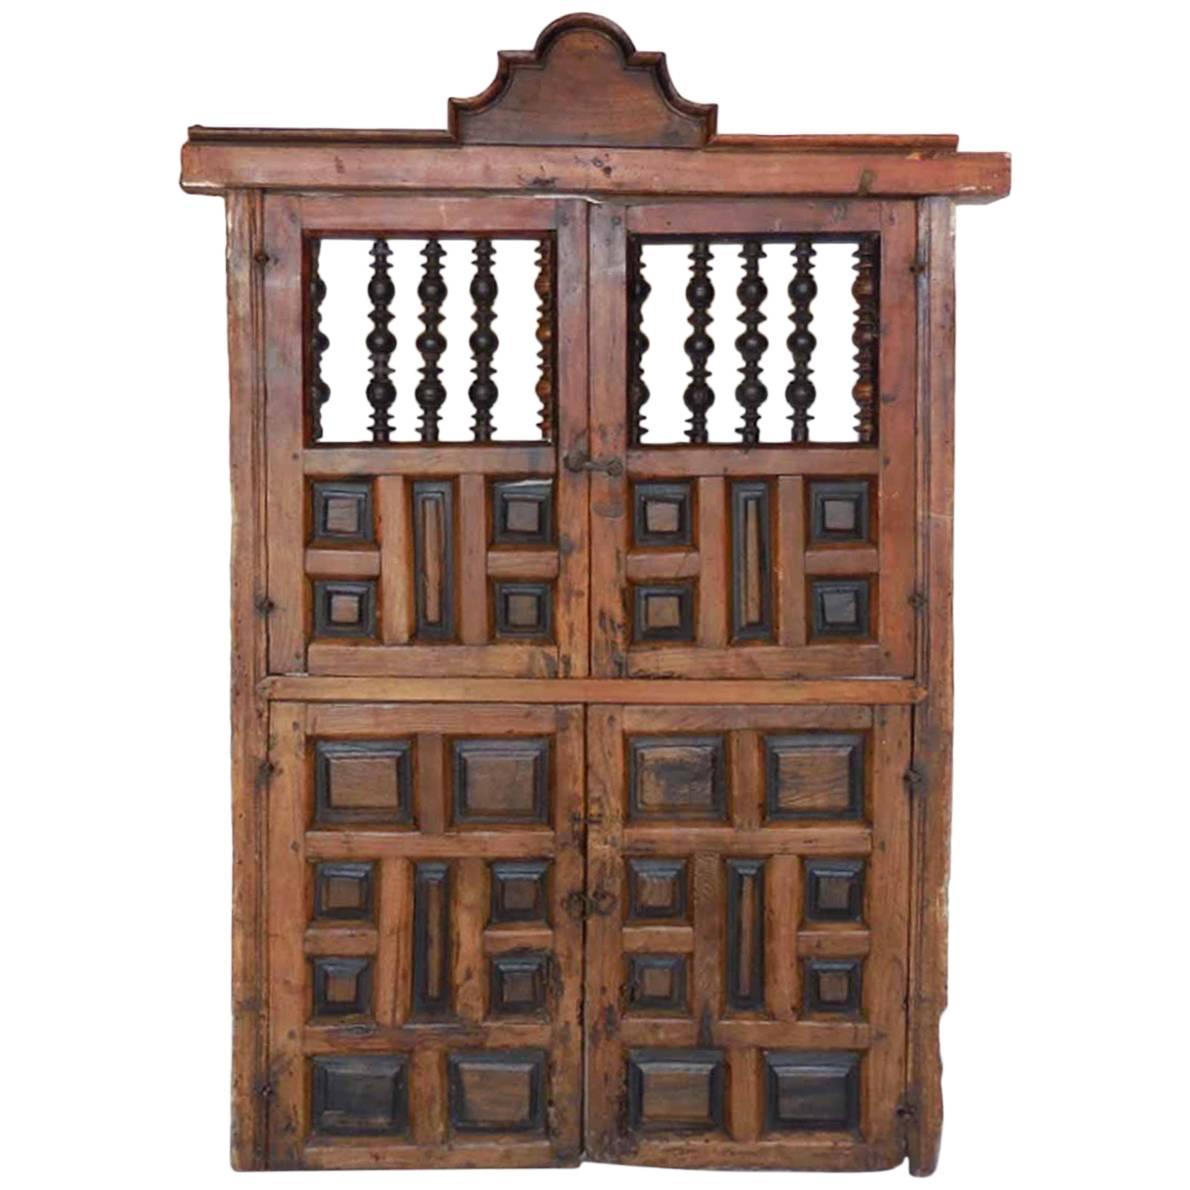 18th Century Wooden Window Shutters with Panels and Turned Wood